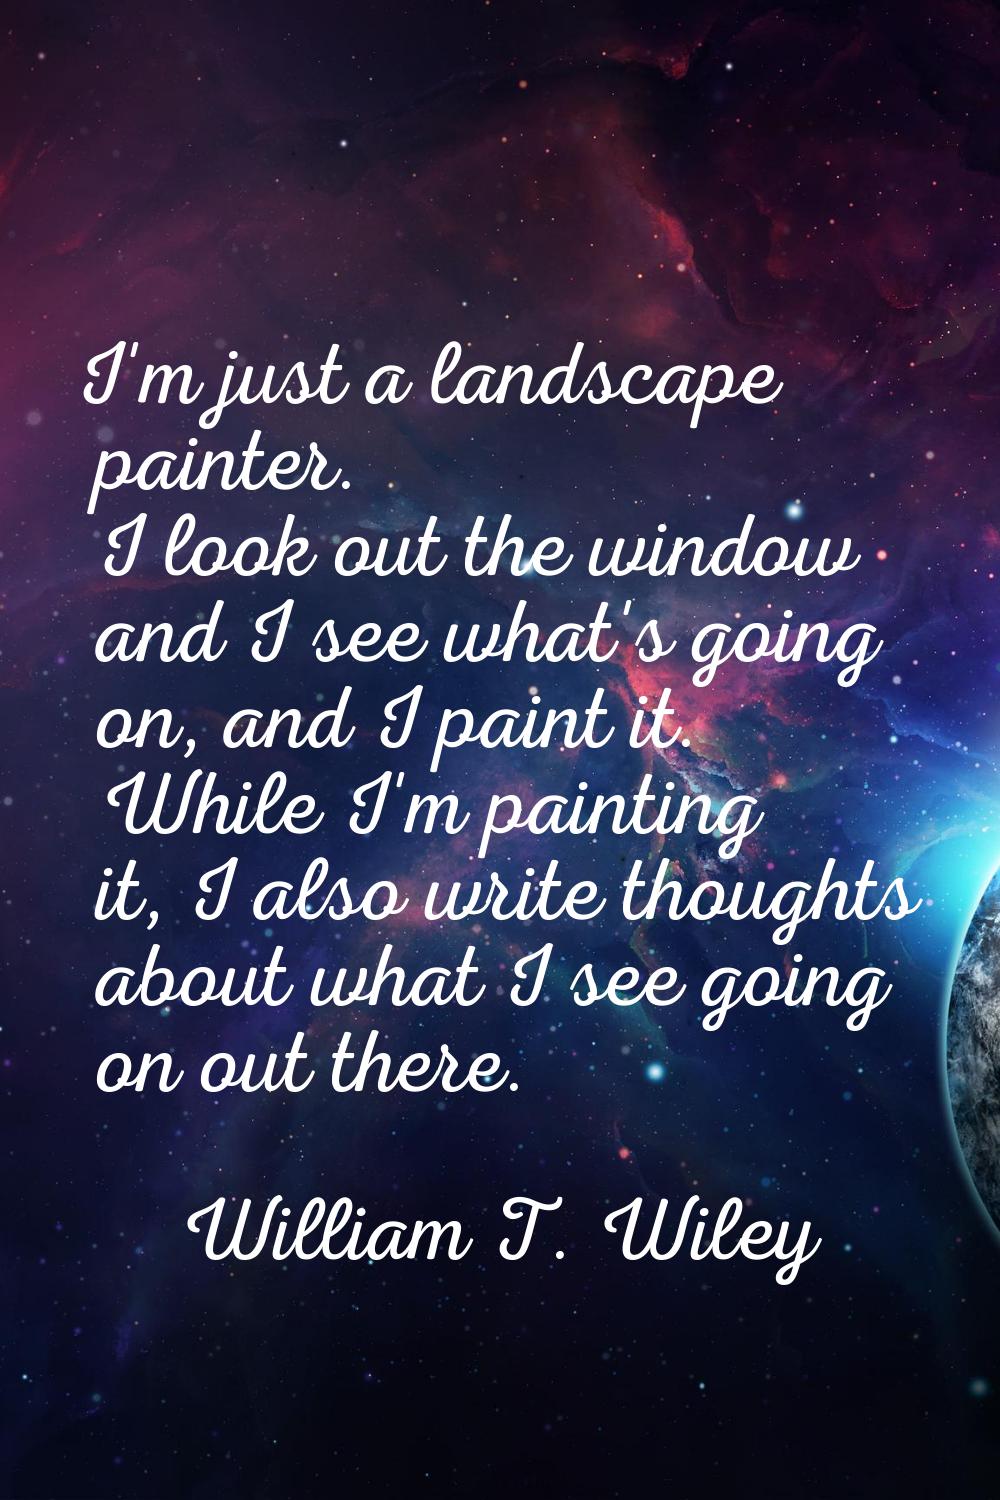 I'm just a landscape painter. I look out the window and I see what's going on, and I paint it. Whil